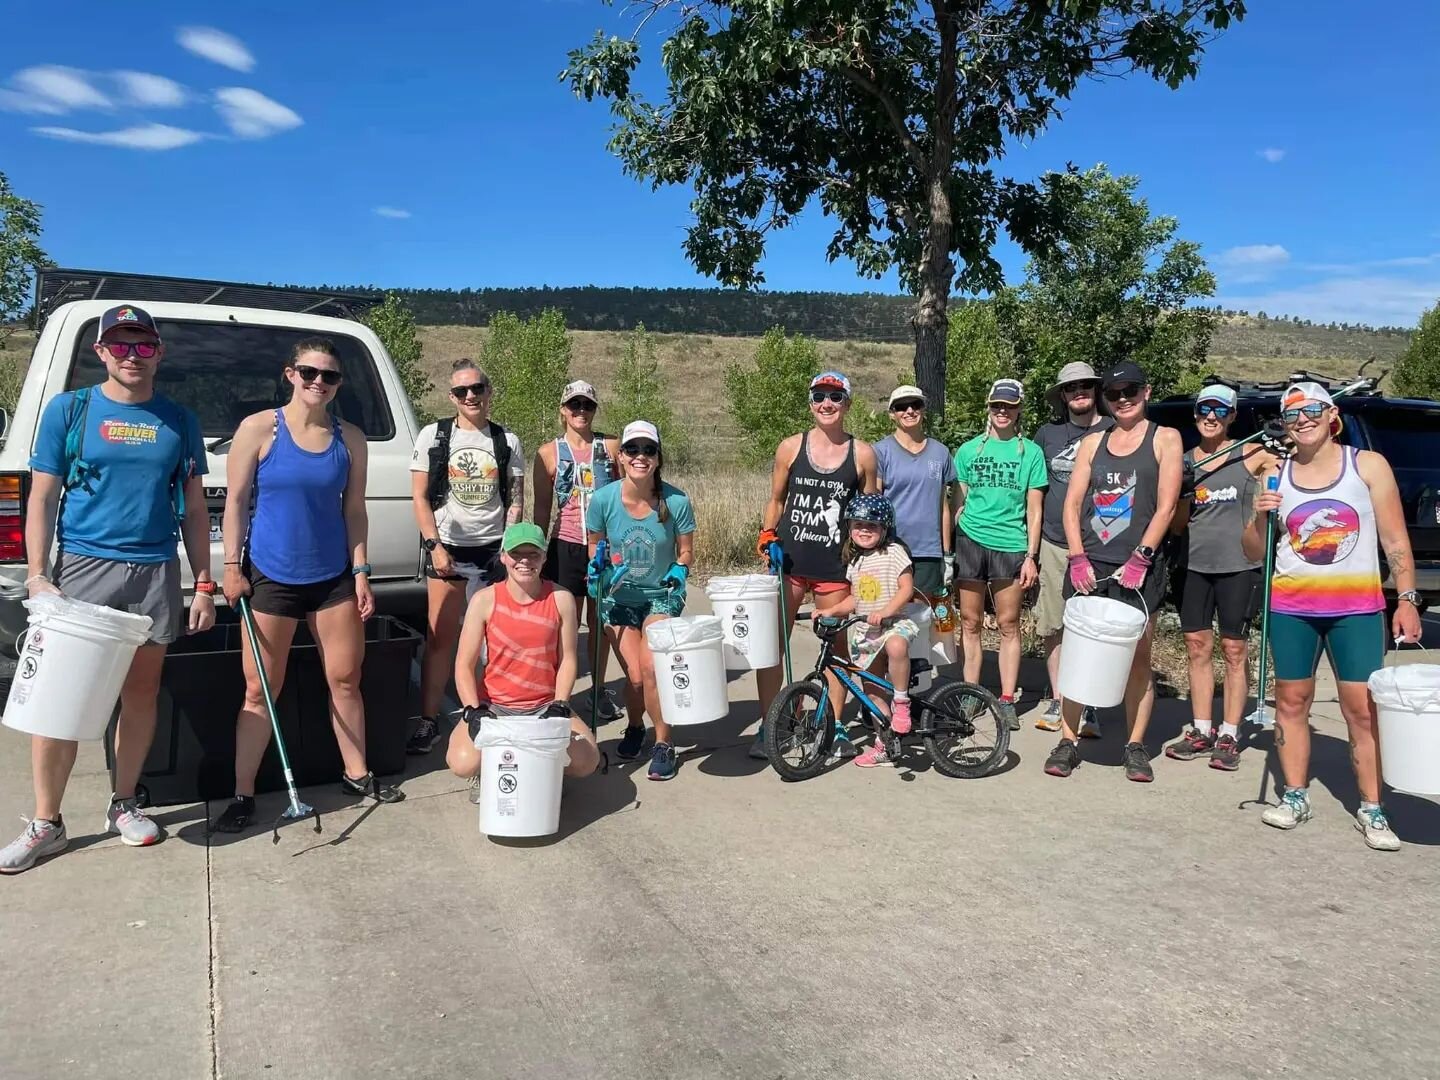 Lots of micro trash and &quot;thank you&quot; at this morning's cleanup event. It was great to support a local trail running group for their event today. Seeing runners give back to the trails and being a part of it is always an awesome feeling. ✌🏼?